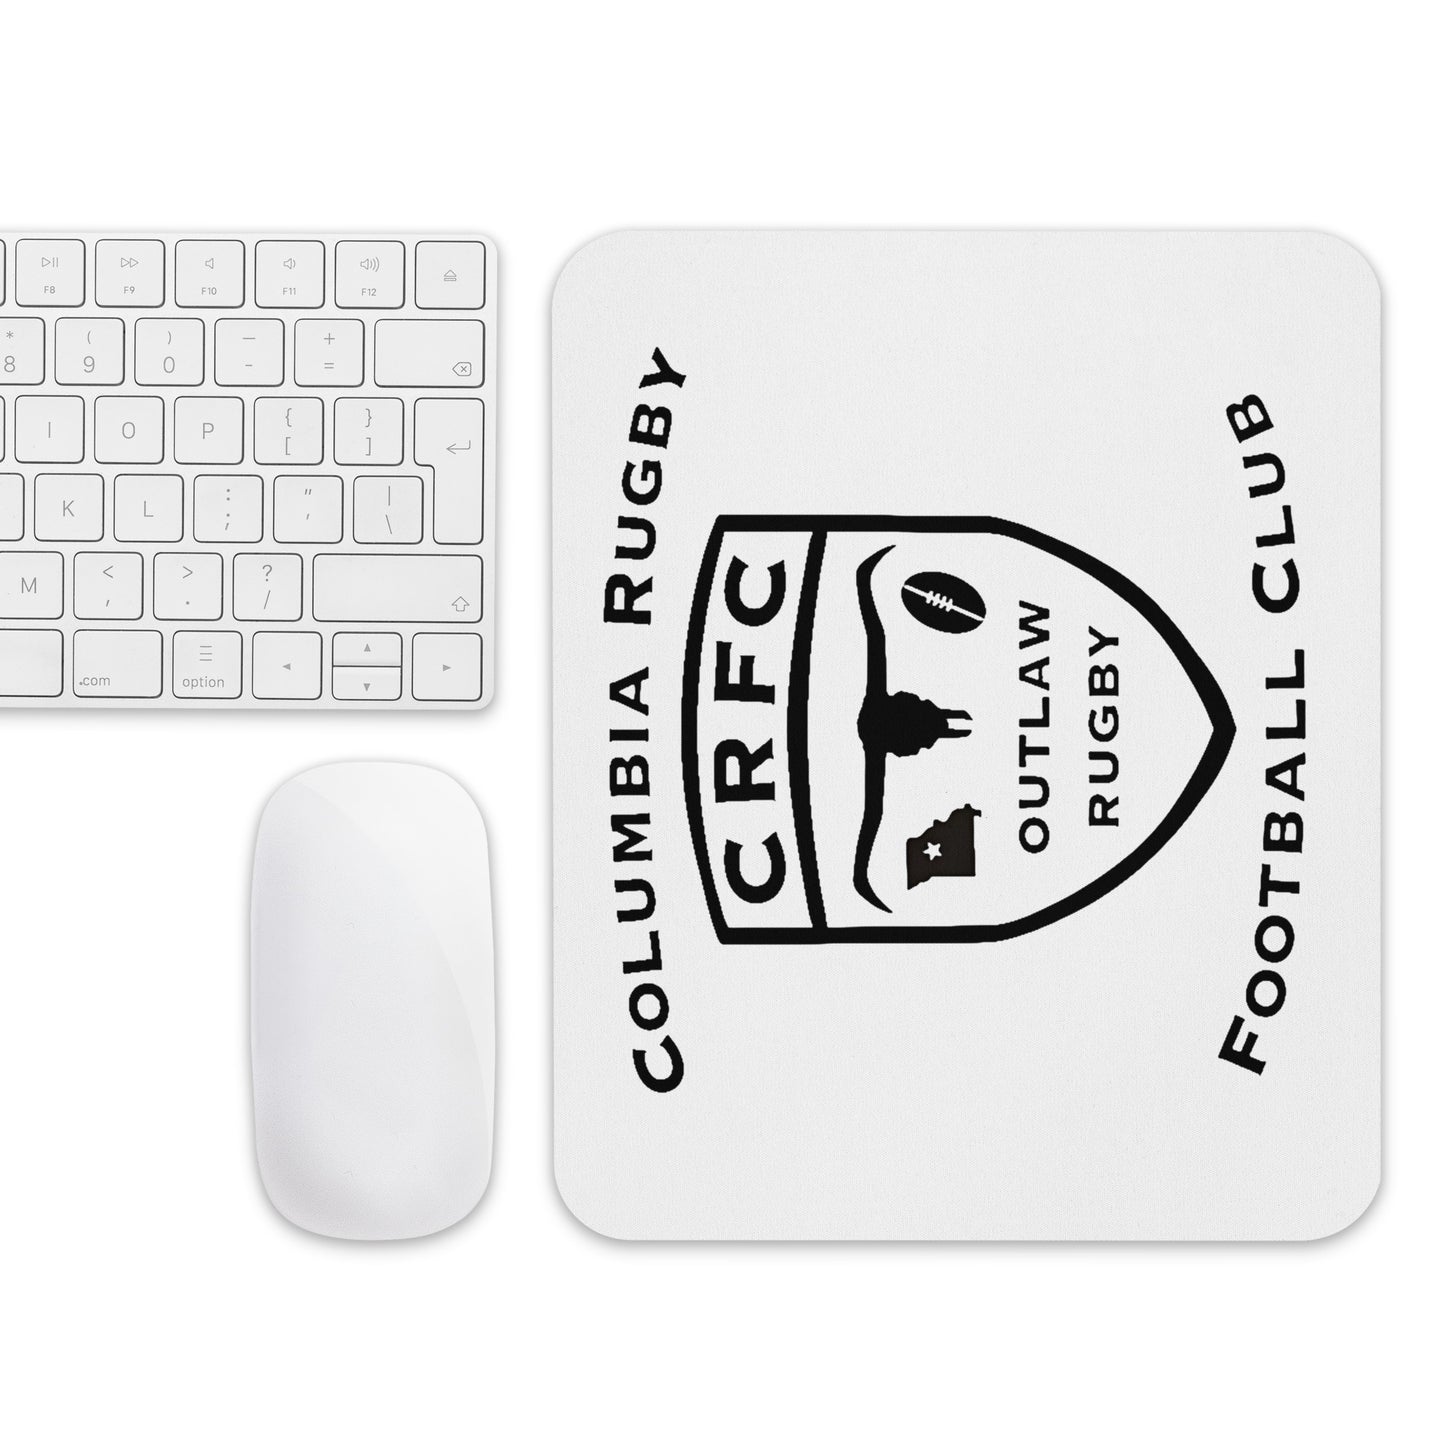 Outlaw's Mouse pad